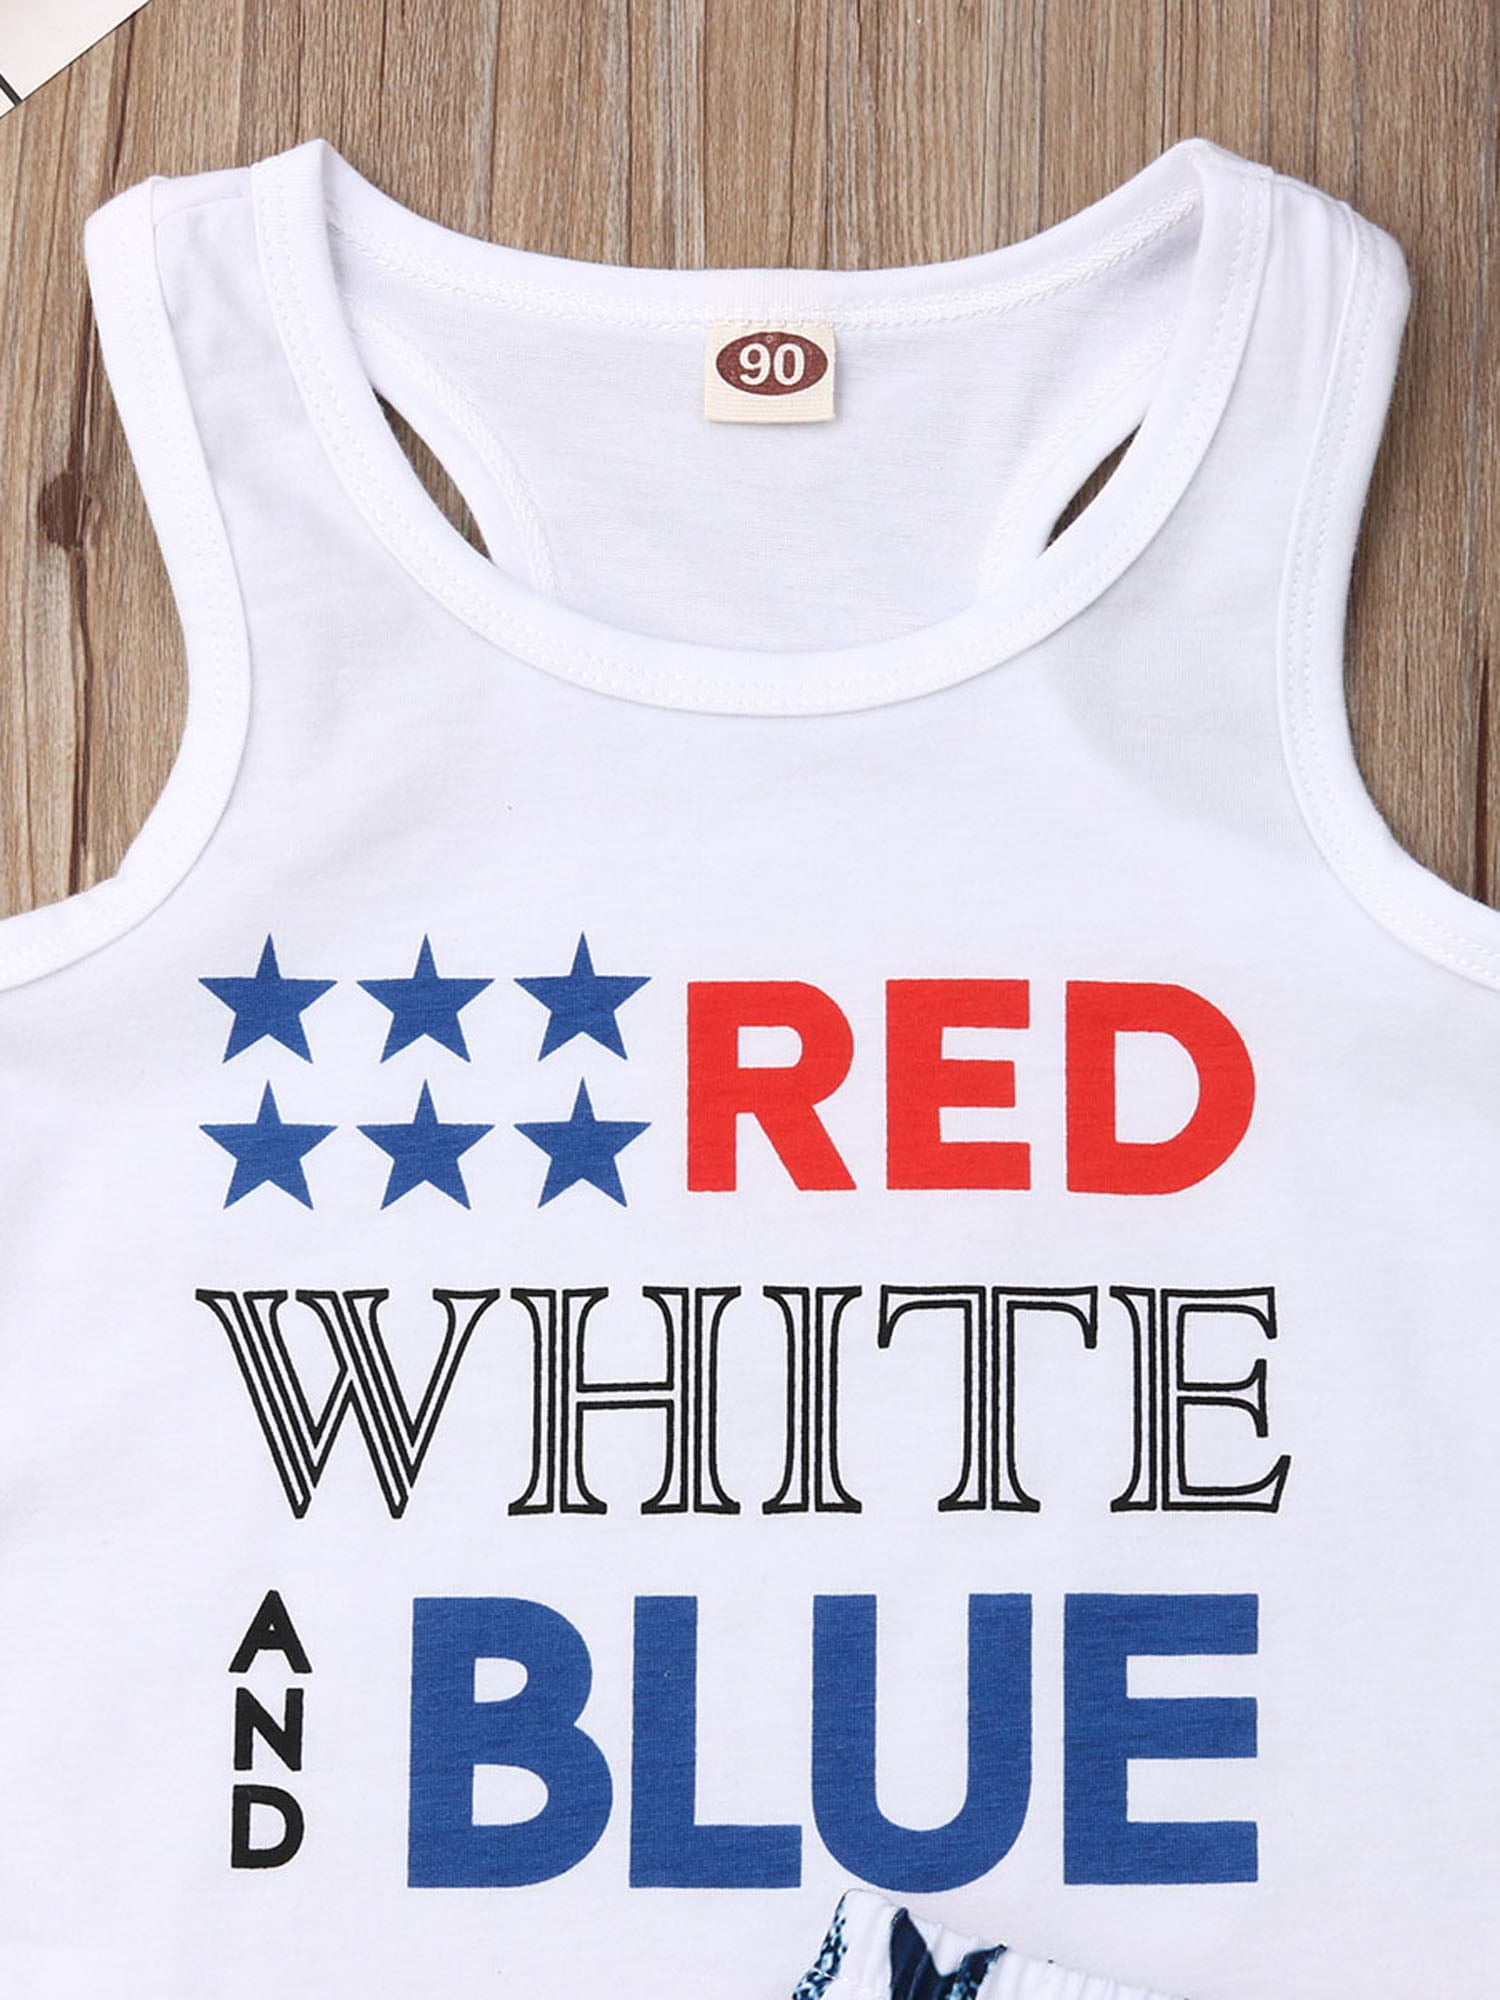 4th of July Baby Boy Outfits shirt Independence Day Tank Tops Infant toddler boys sleeveless shirt shorts 2set